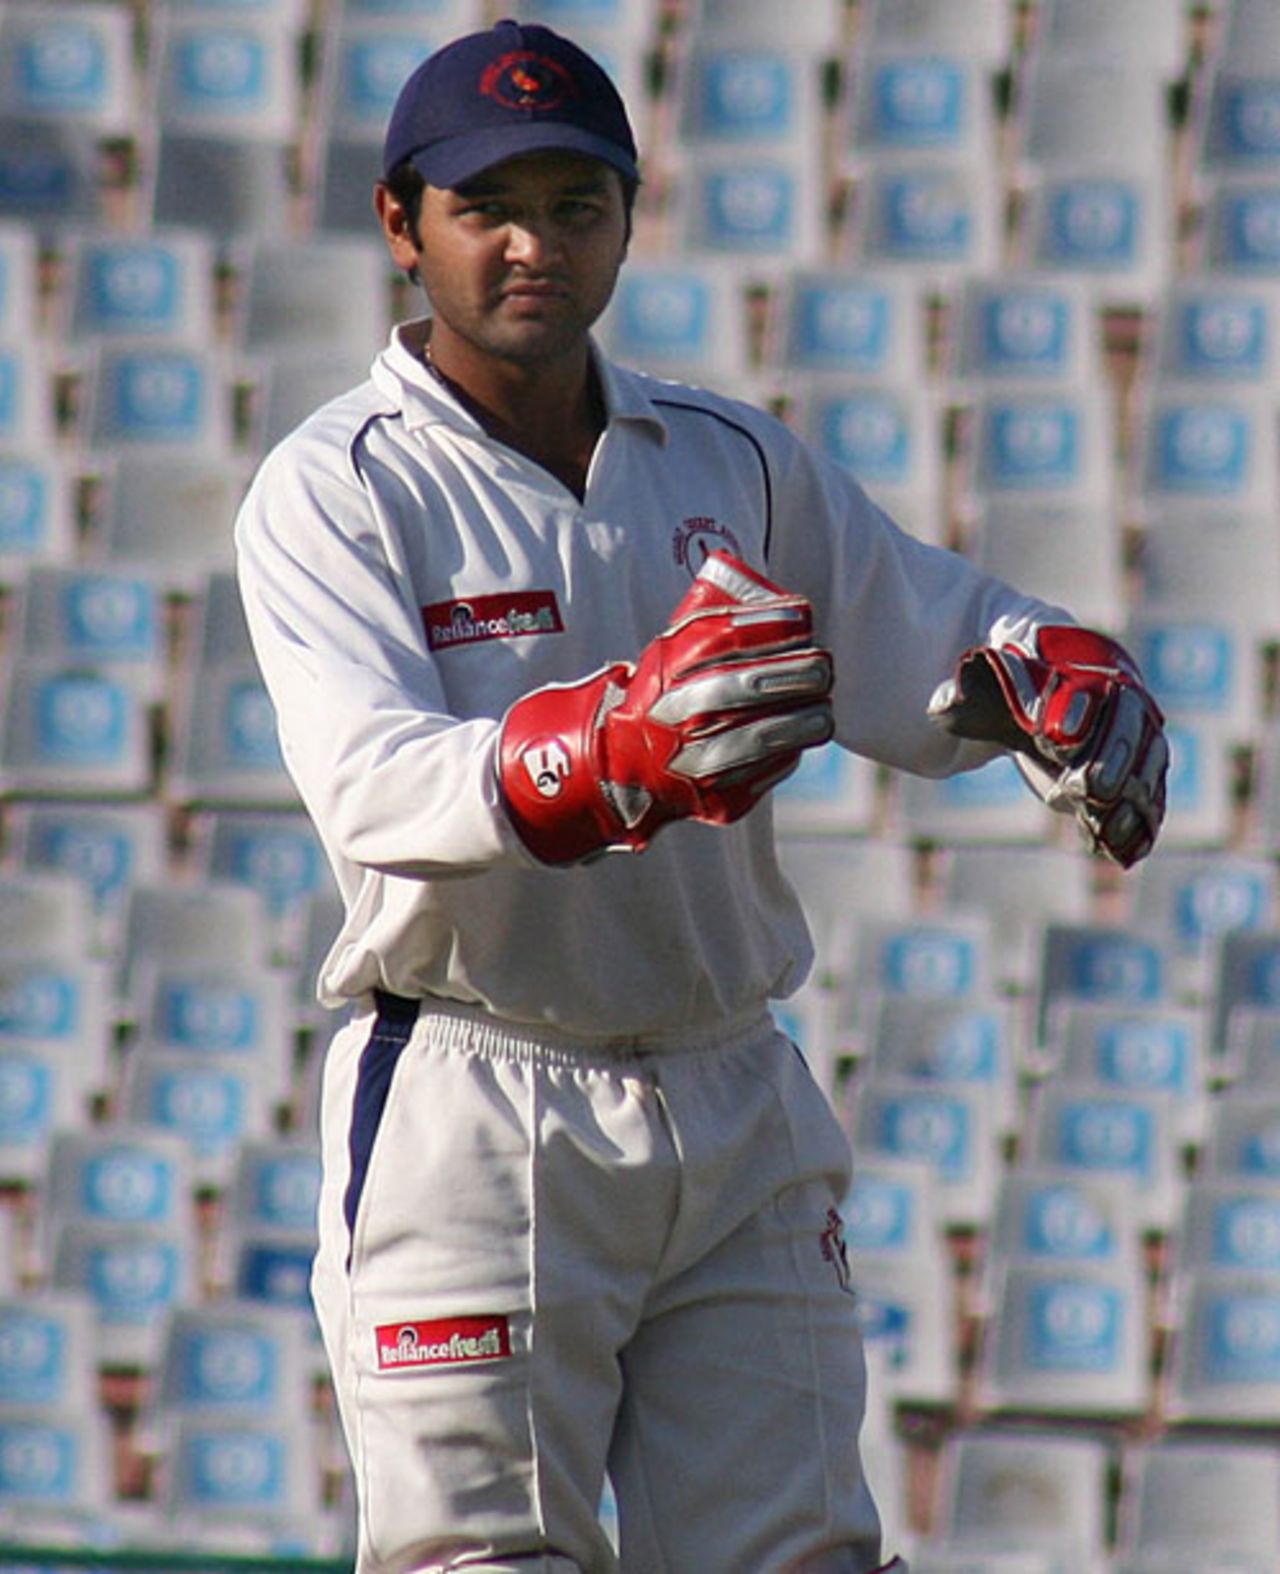 Parthiv Patel gets ready for a session behind the stumps, Punjab v Gujarat, Ranji Trophy Super League, Mohali, 2nd day, November 25, 2009